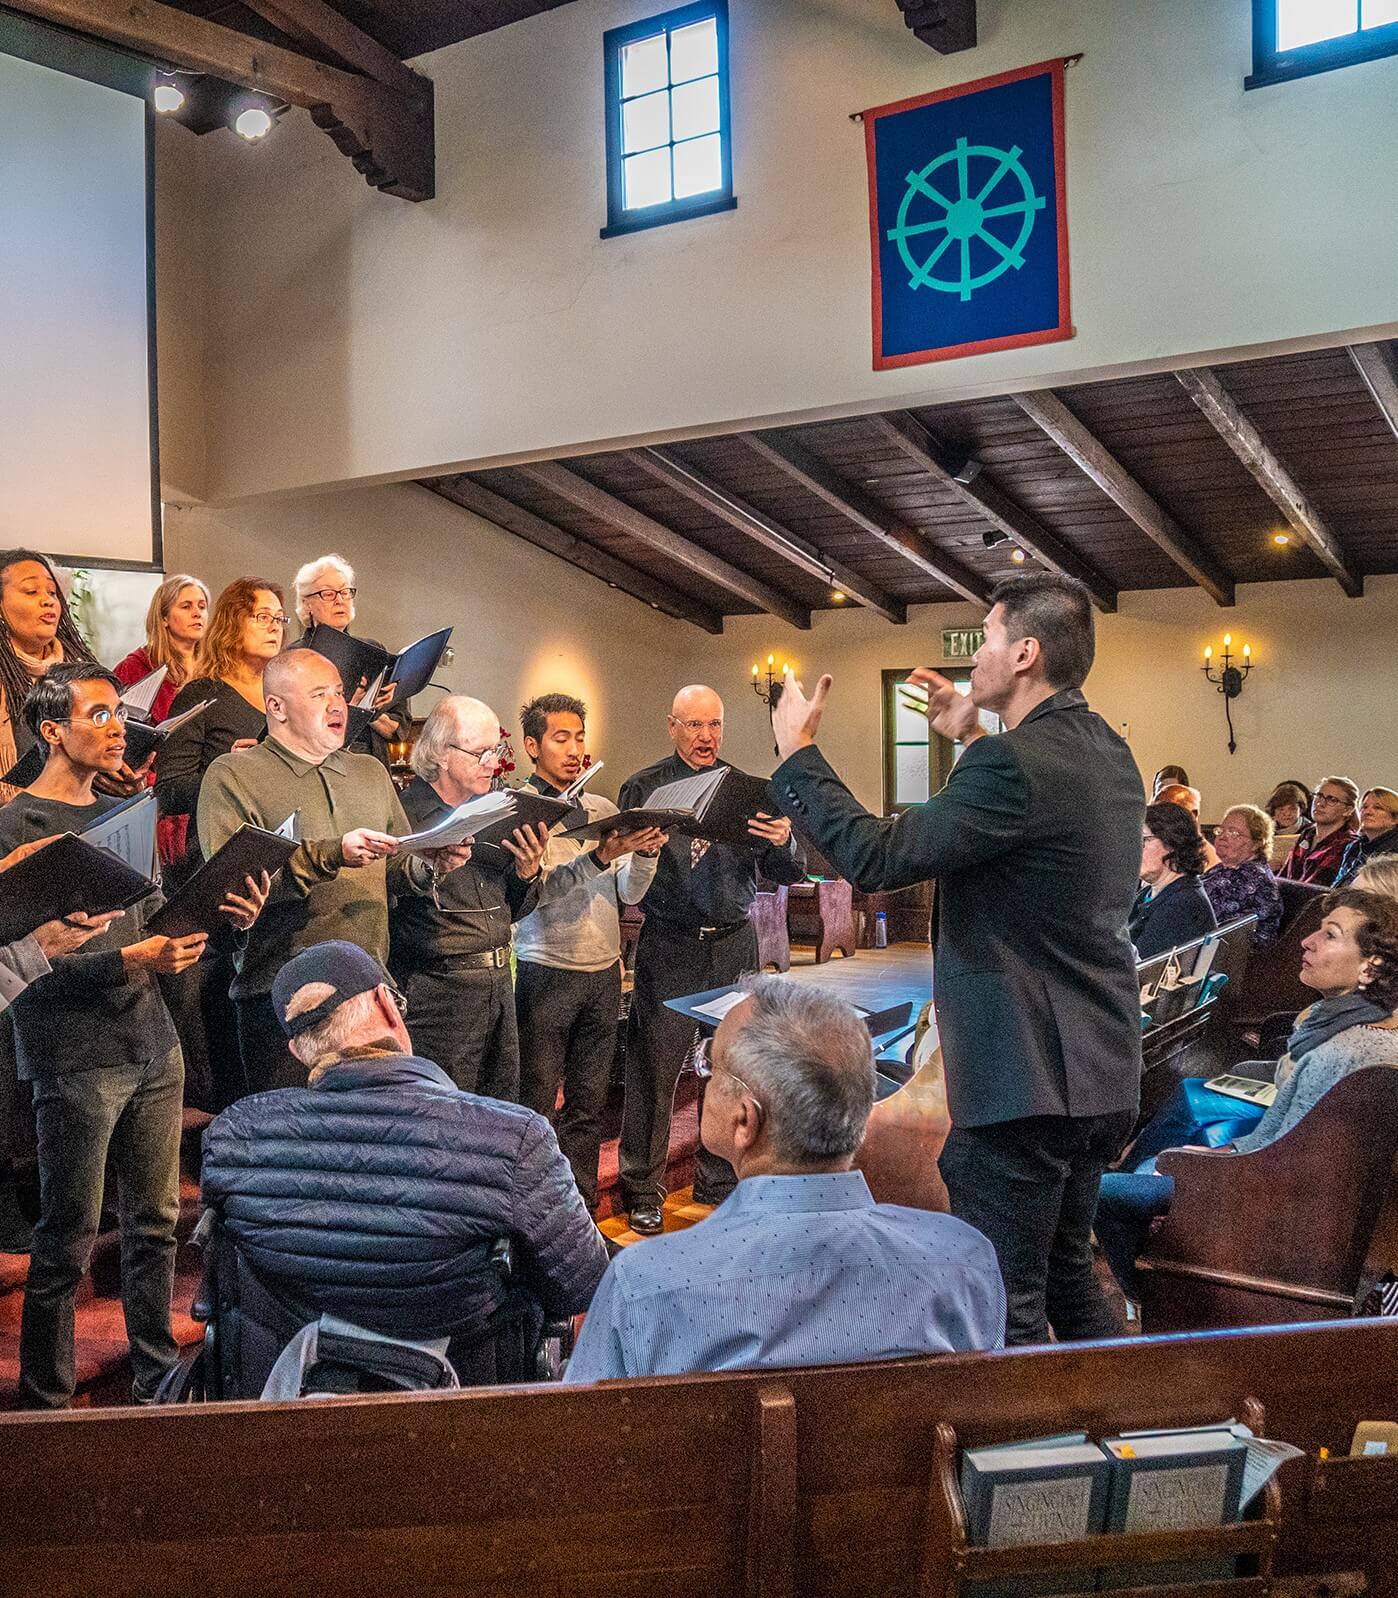 Music-filled Sunday services with the choir